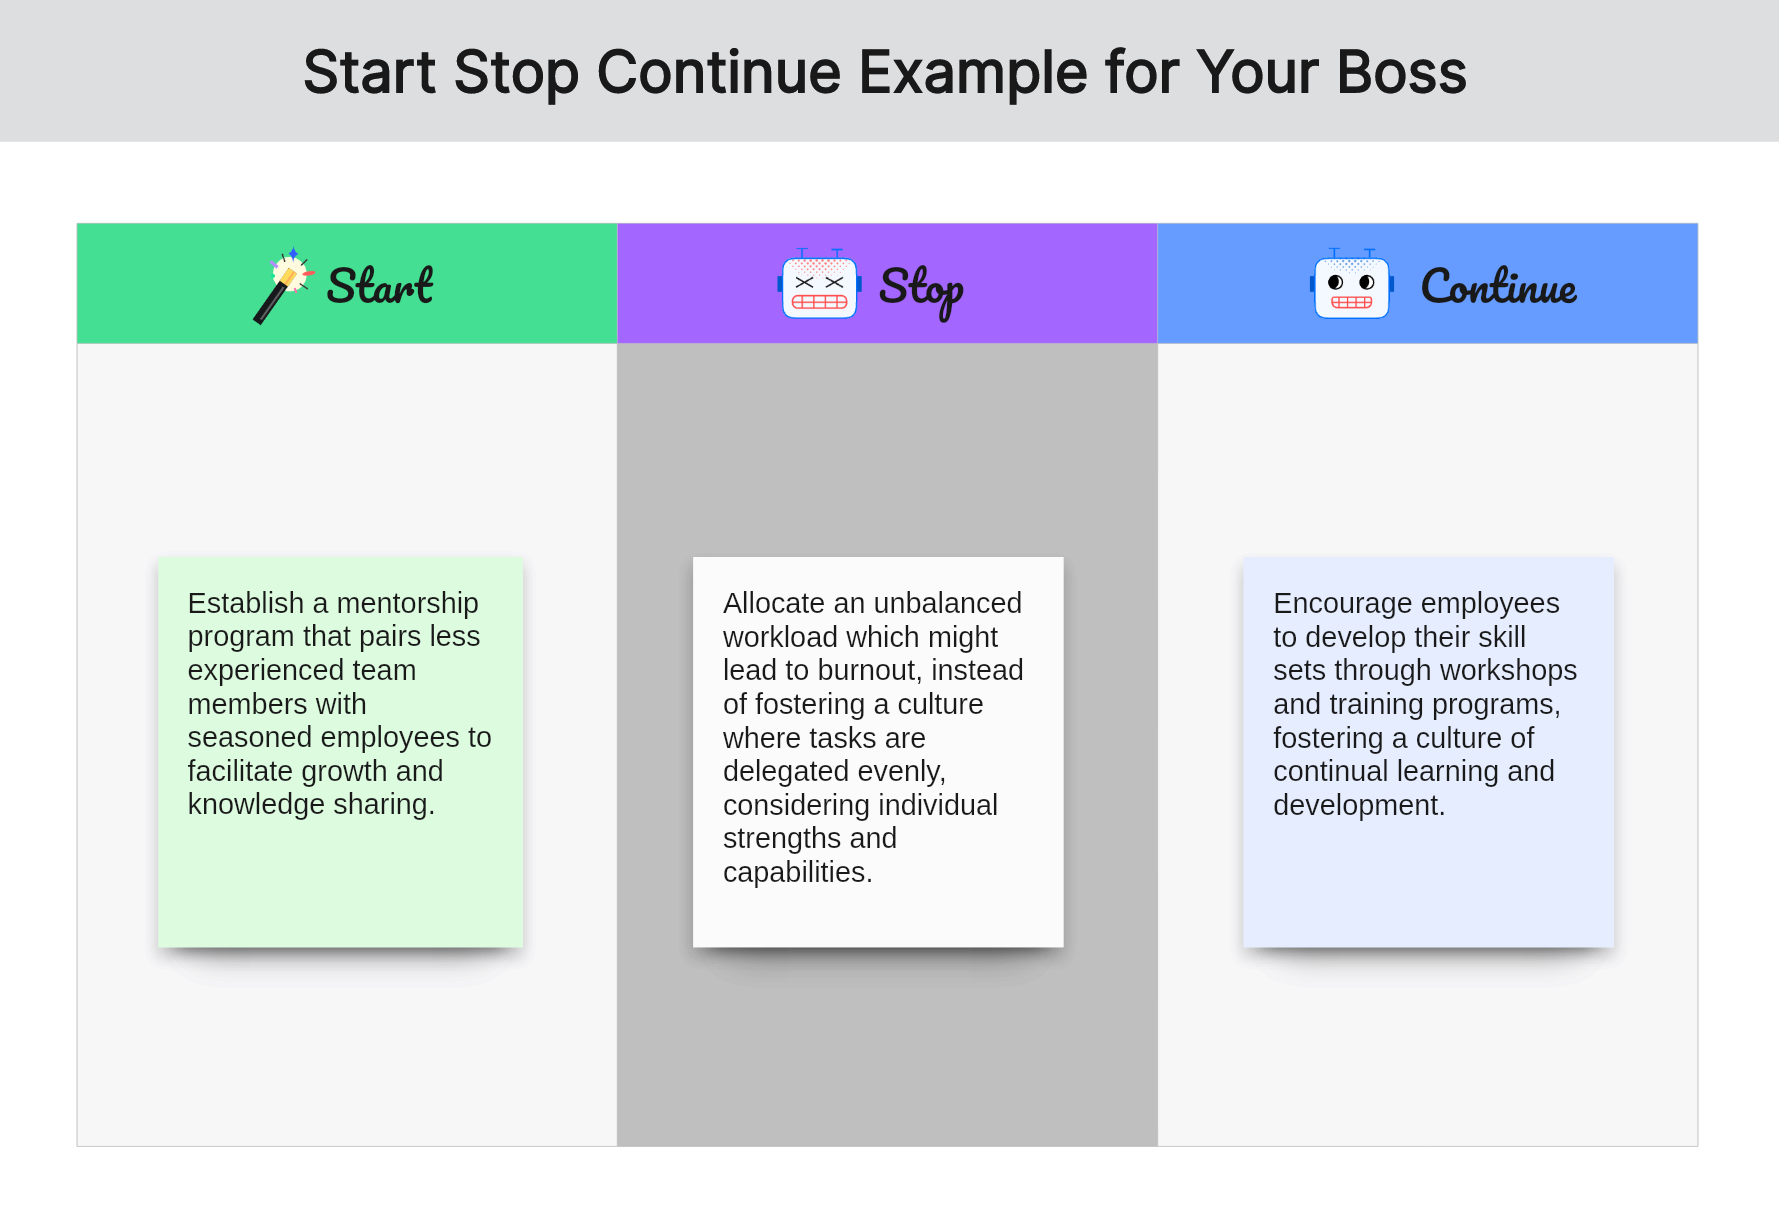 start-stop-continue-examples-for-boss-02